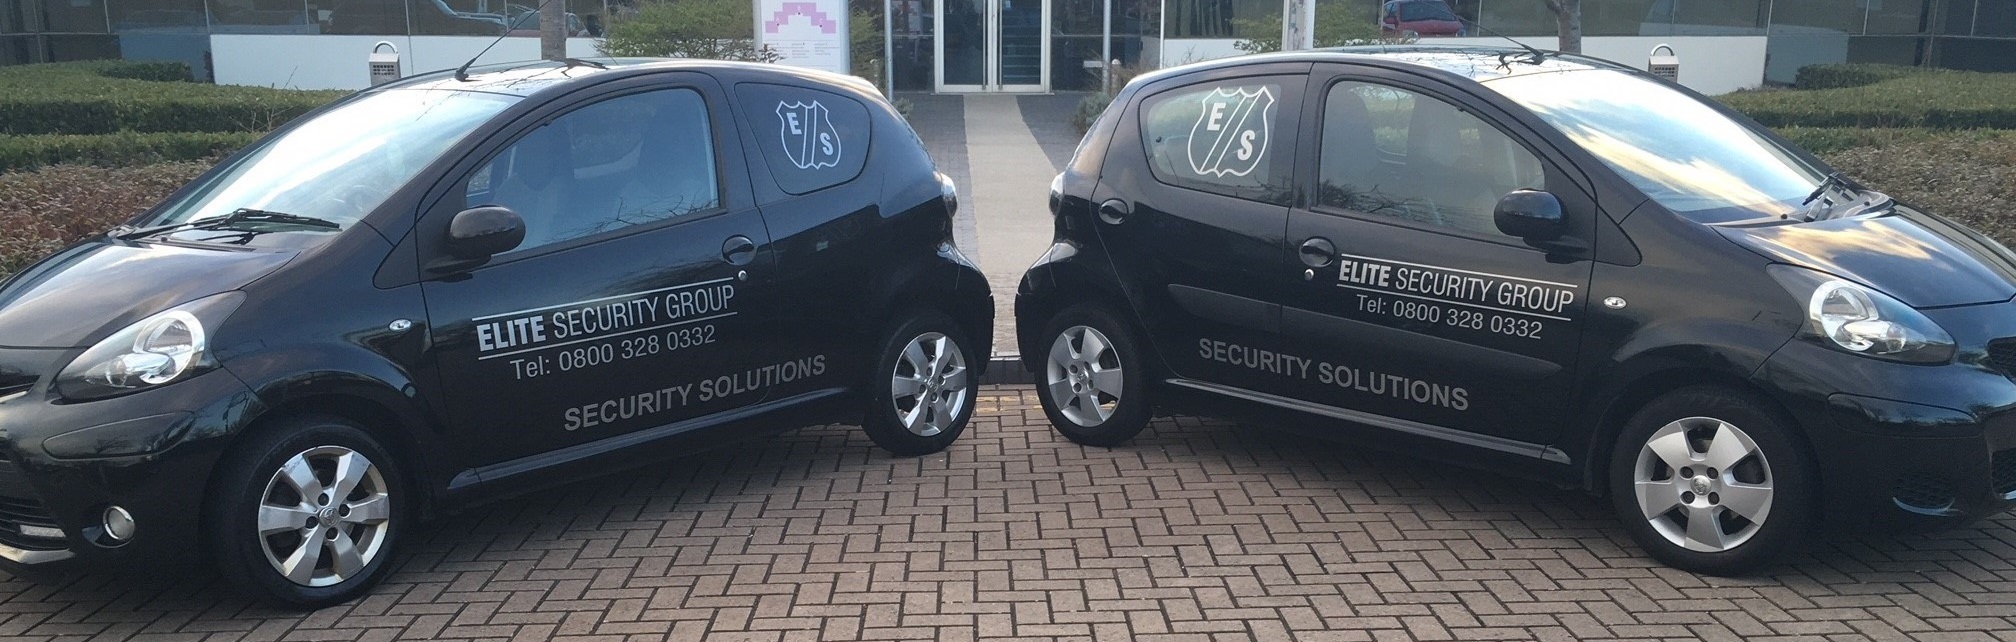 Mobile Security Services - Image of Aygo Vehicles